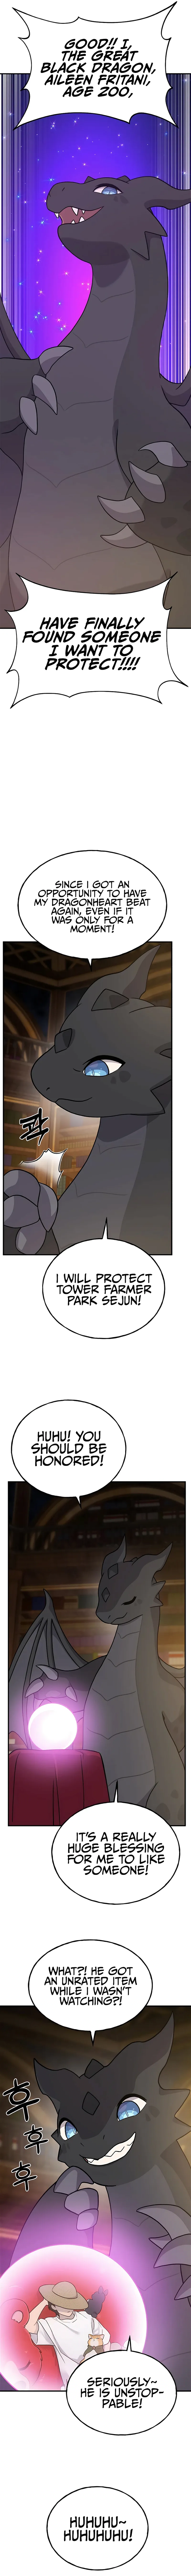 Solo Farming In The Tower Chapter 29 page 19